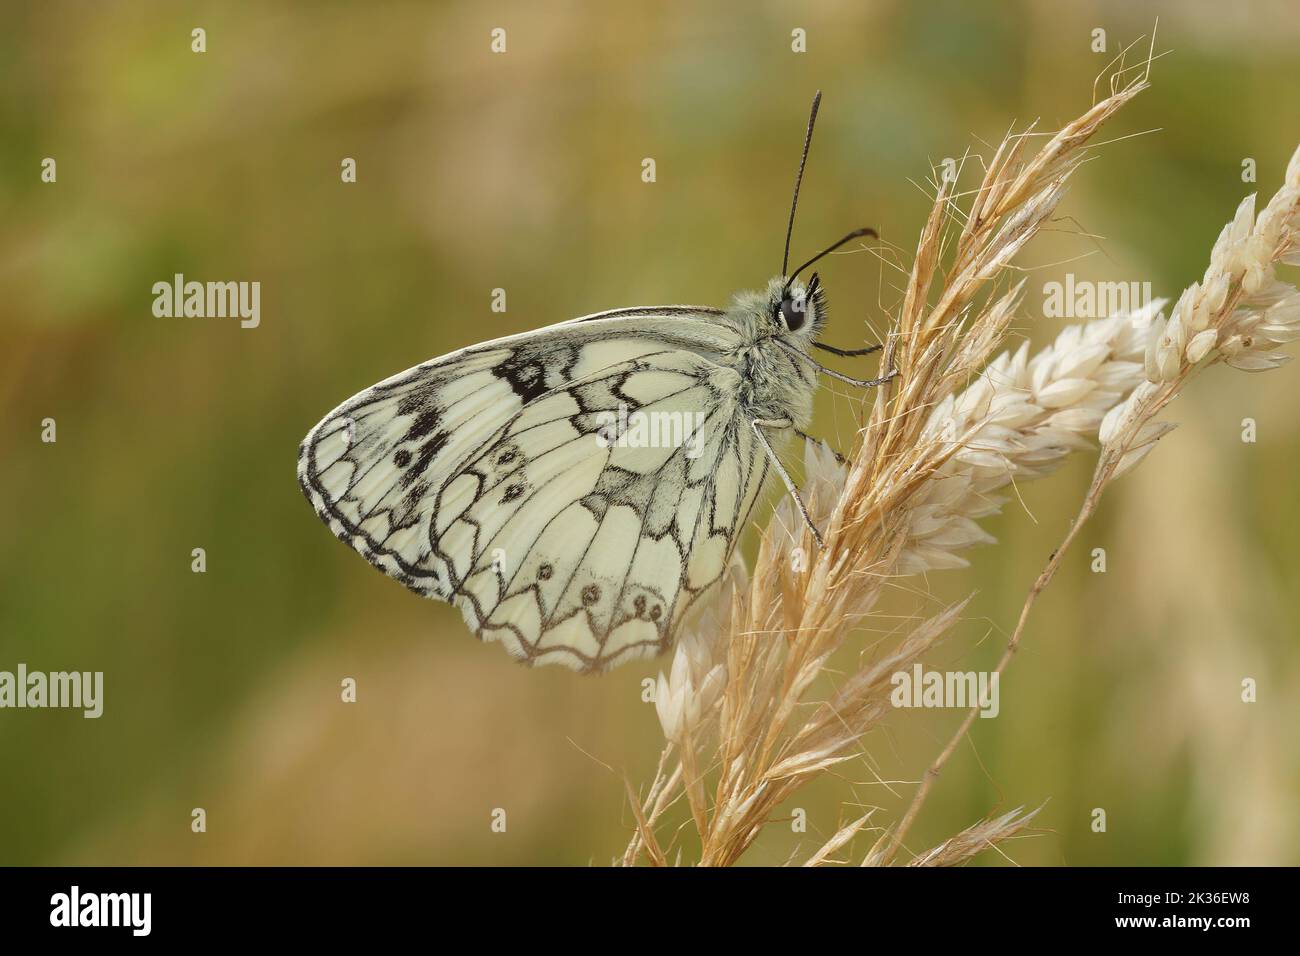 Closeup on a European marbled whhite butterfly, Melanargia galathea with sitting closed wings on a gras straw Stock Photo